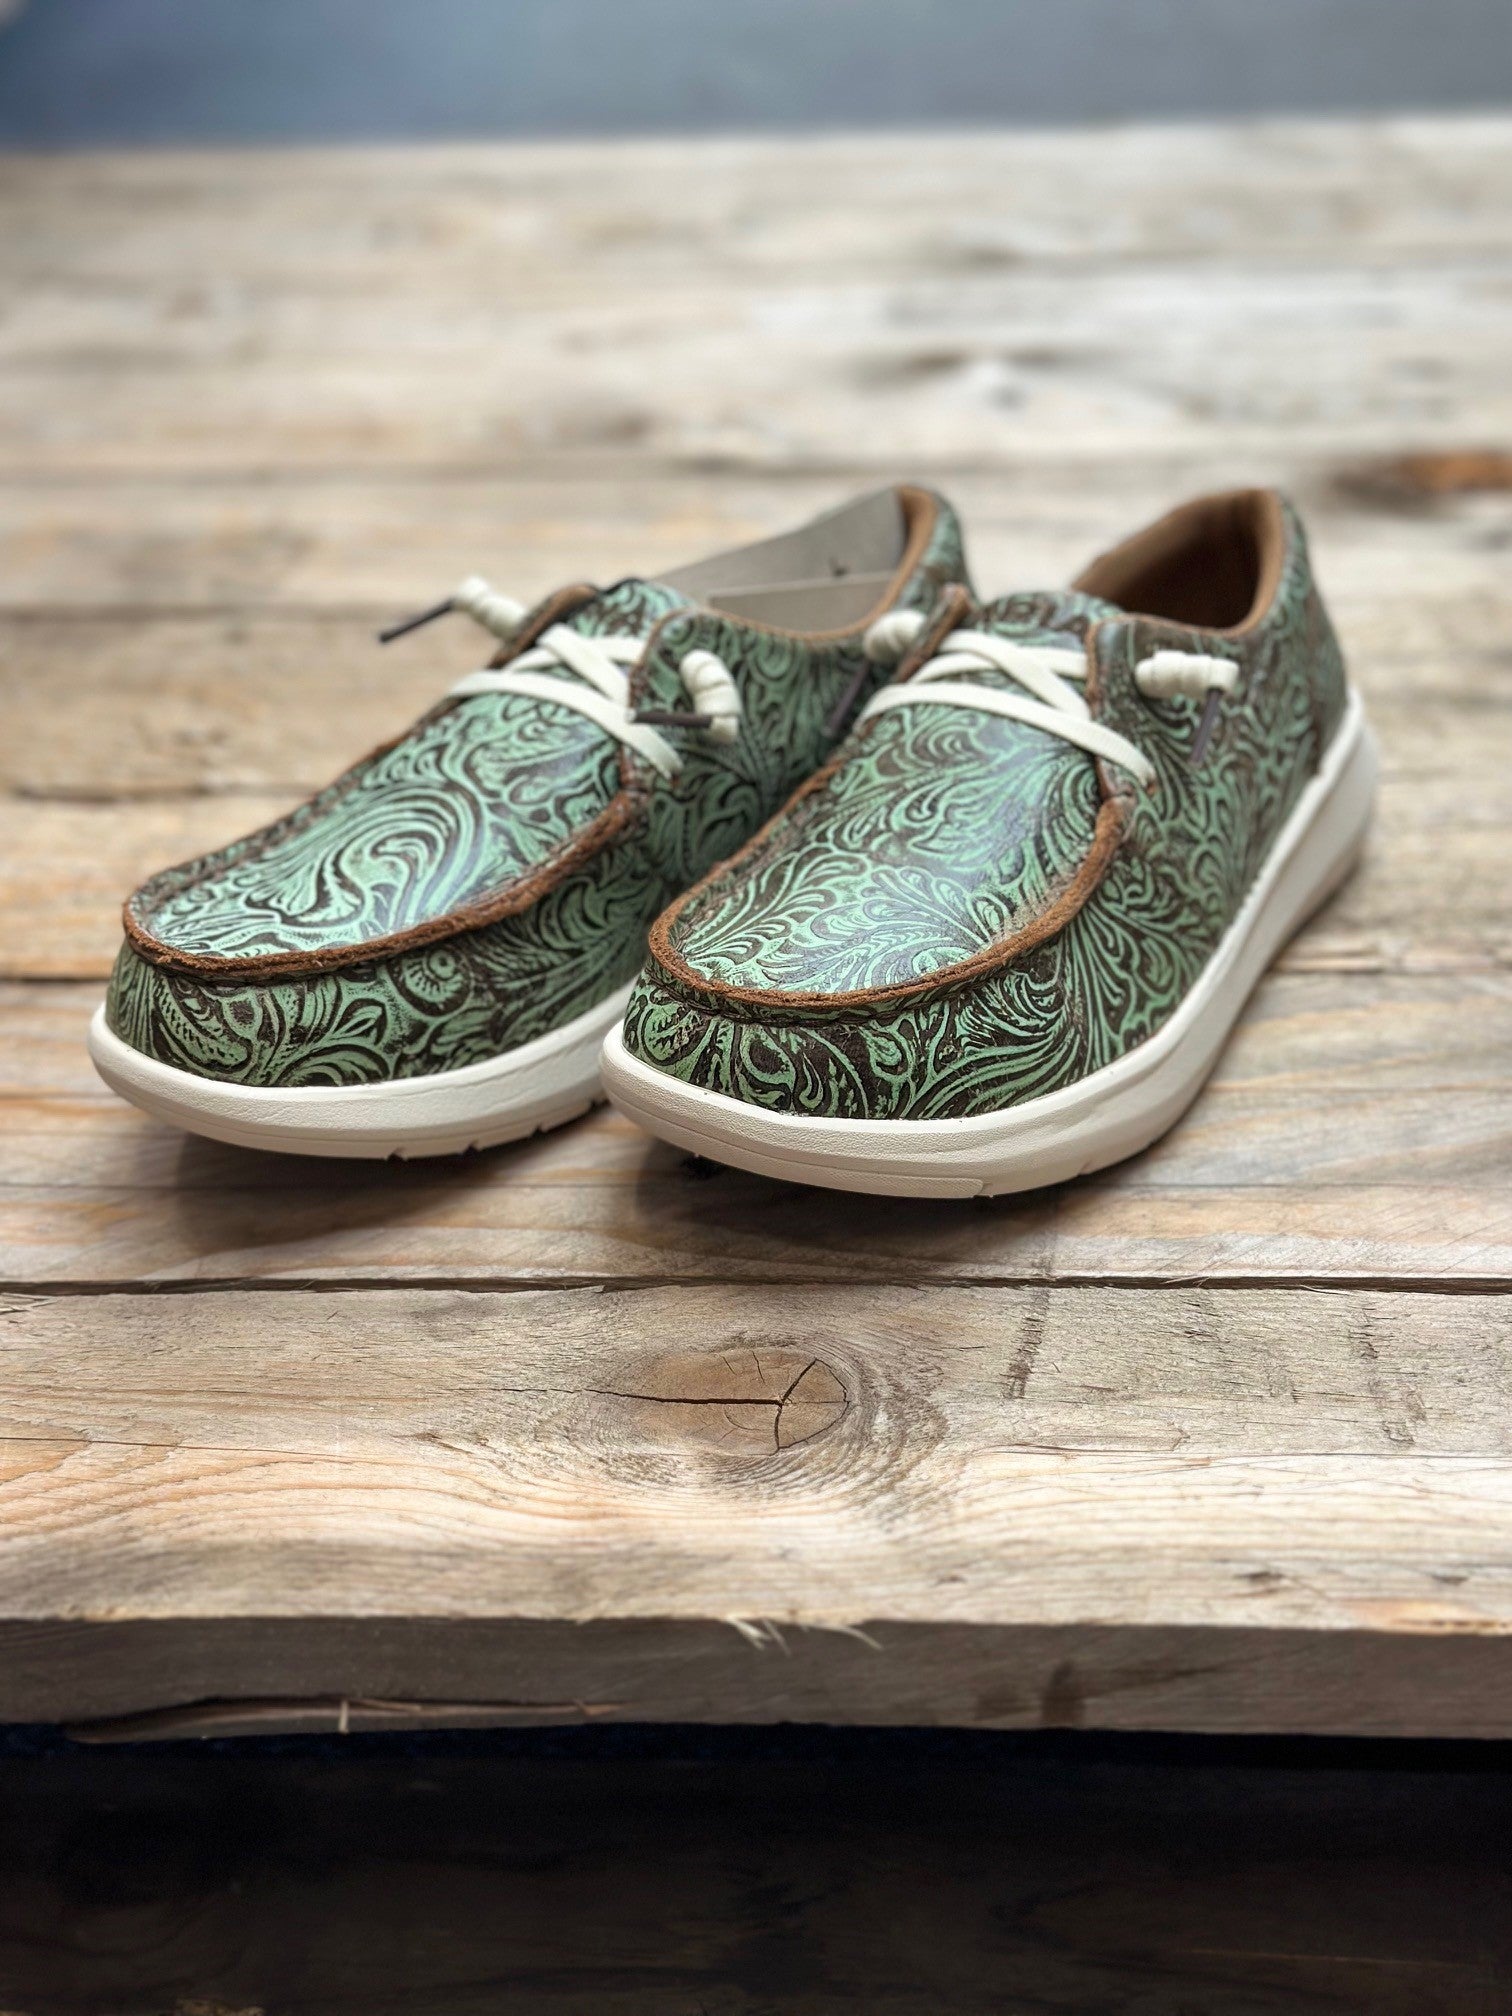 Womens Ariat Hilo Slip on Shoe - Turquoise Floral Embossed (6851764027469)